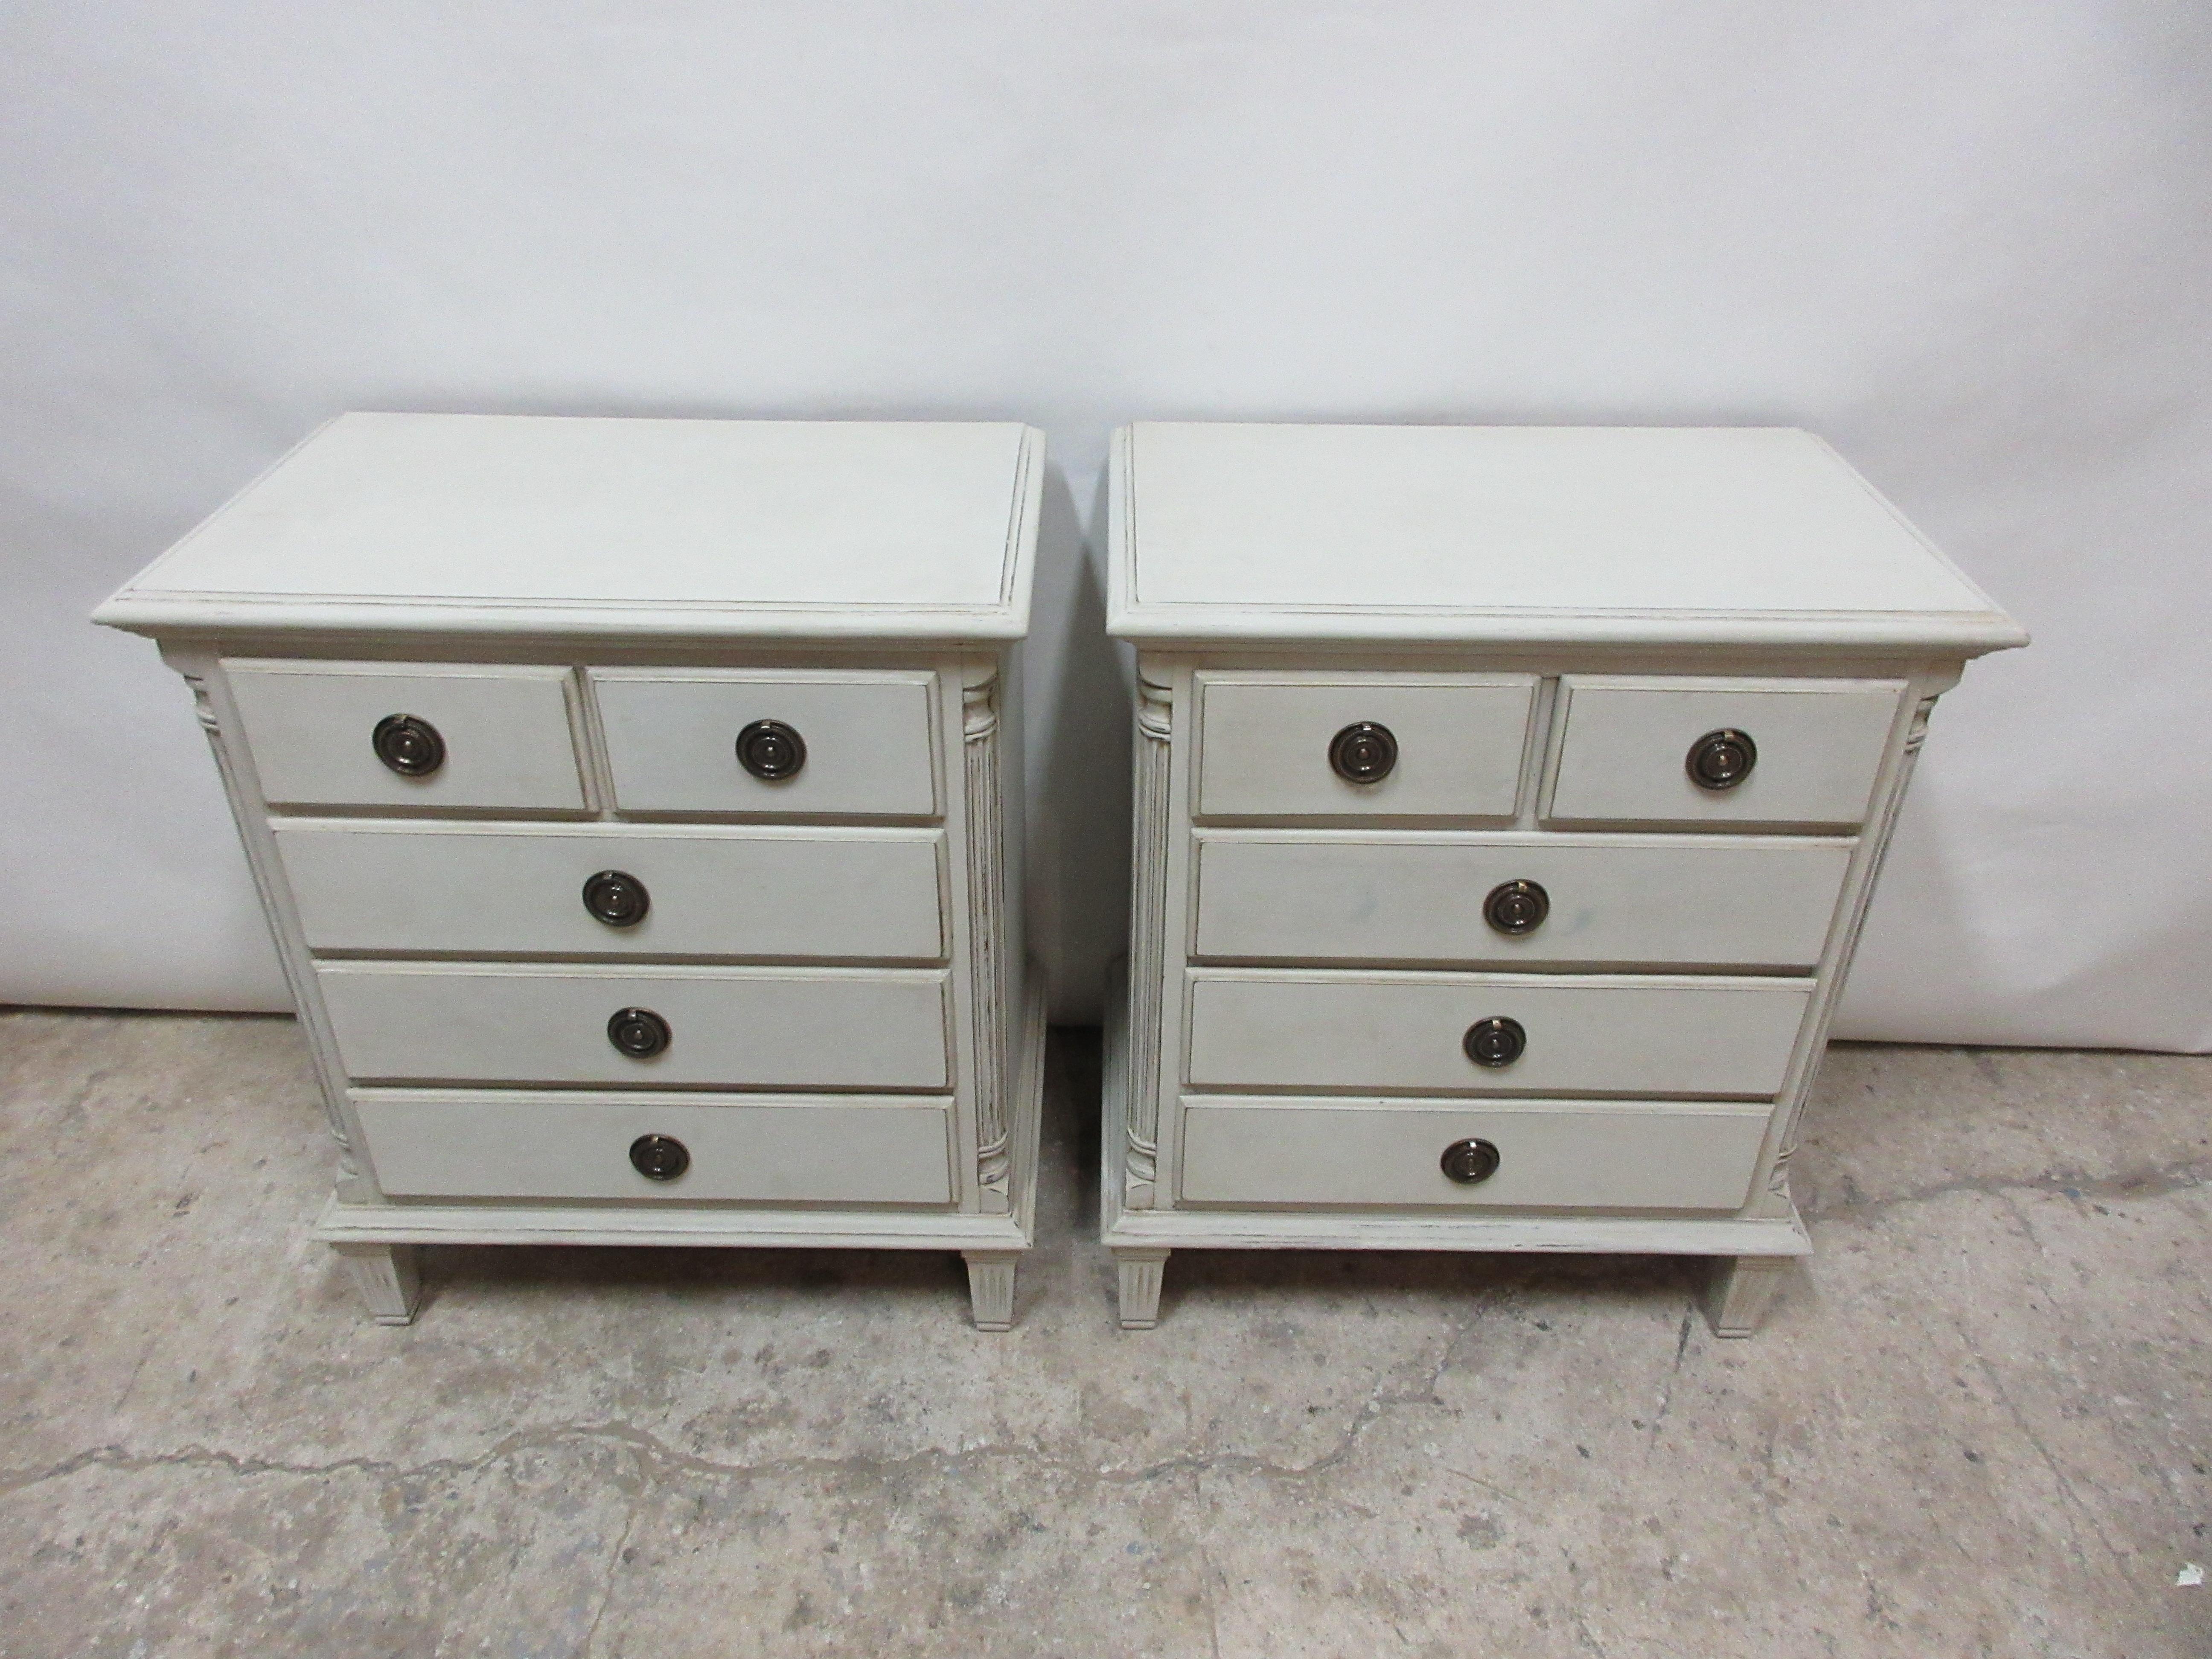 This is a set of 2 Gustavian style 5-drawer nightstands. They have been restored and repainted with milk paints 